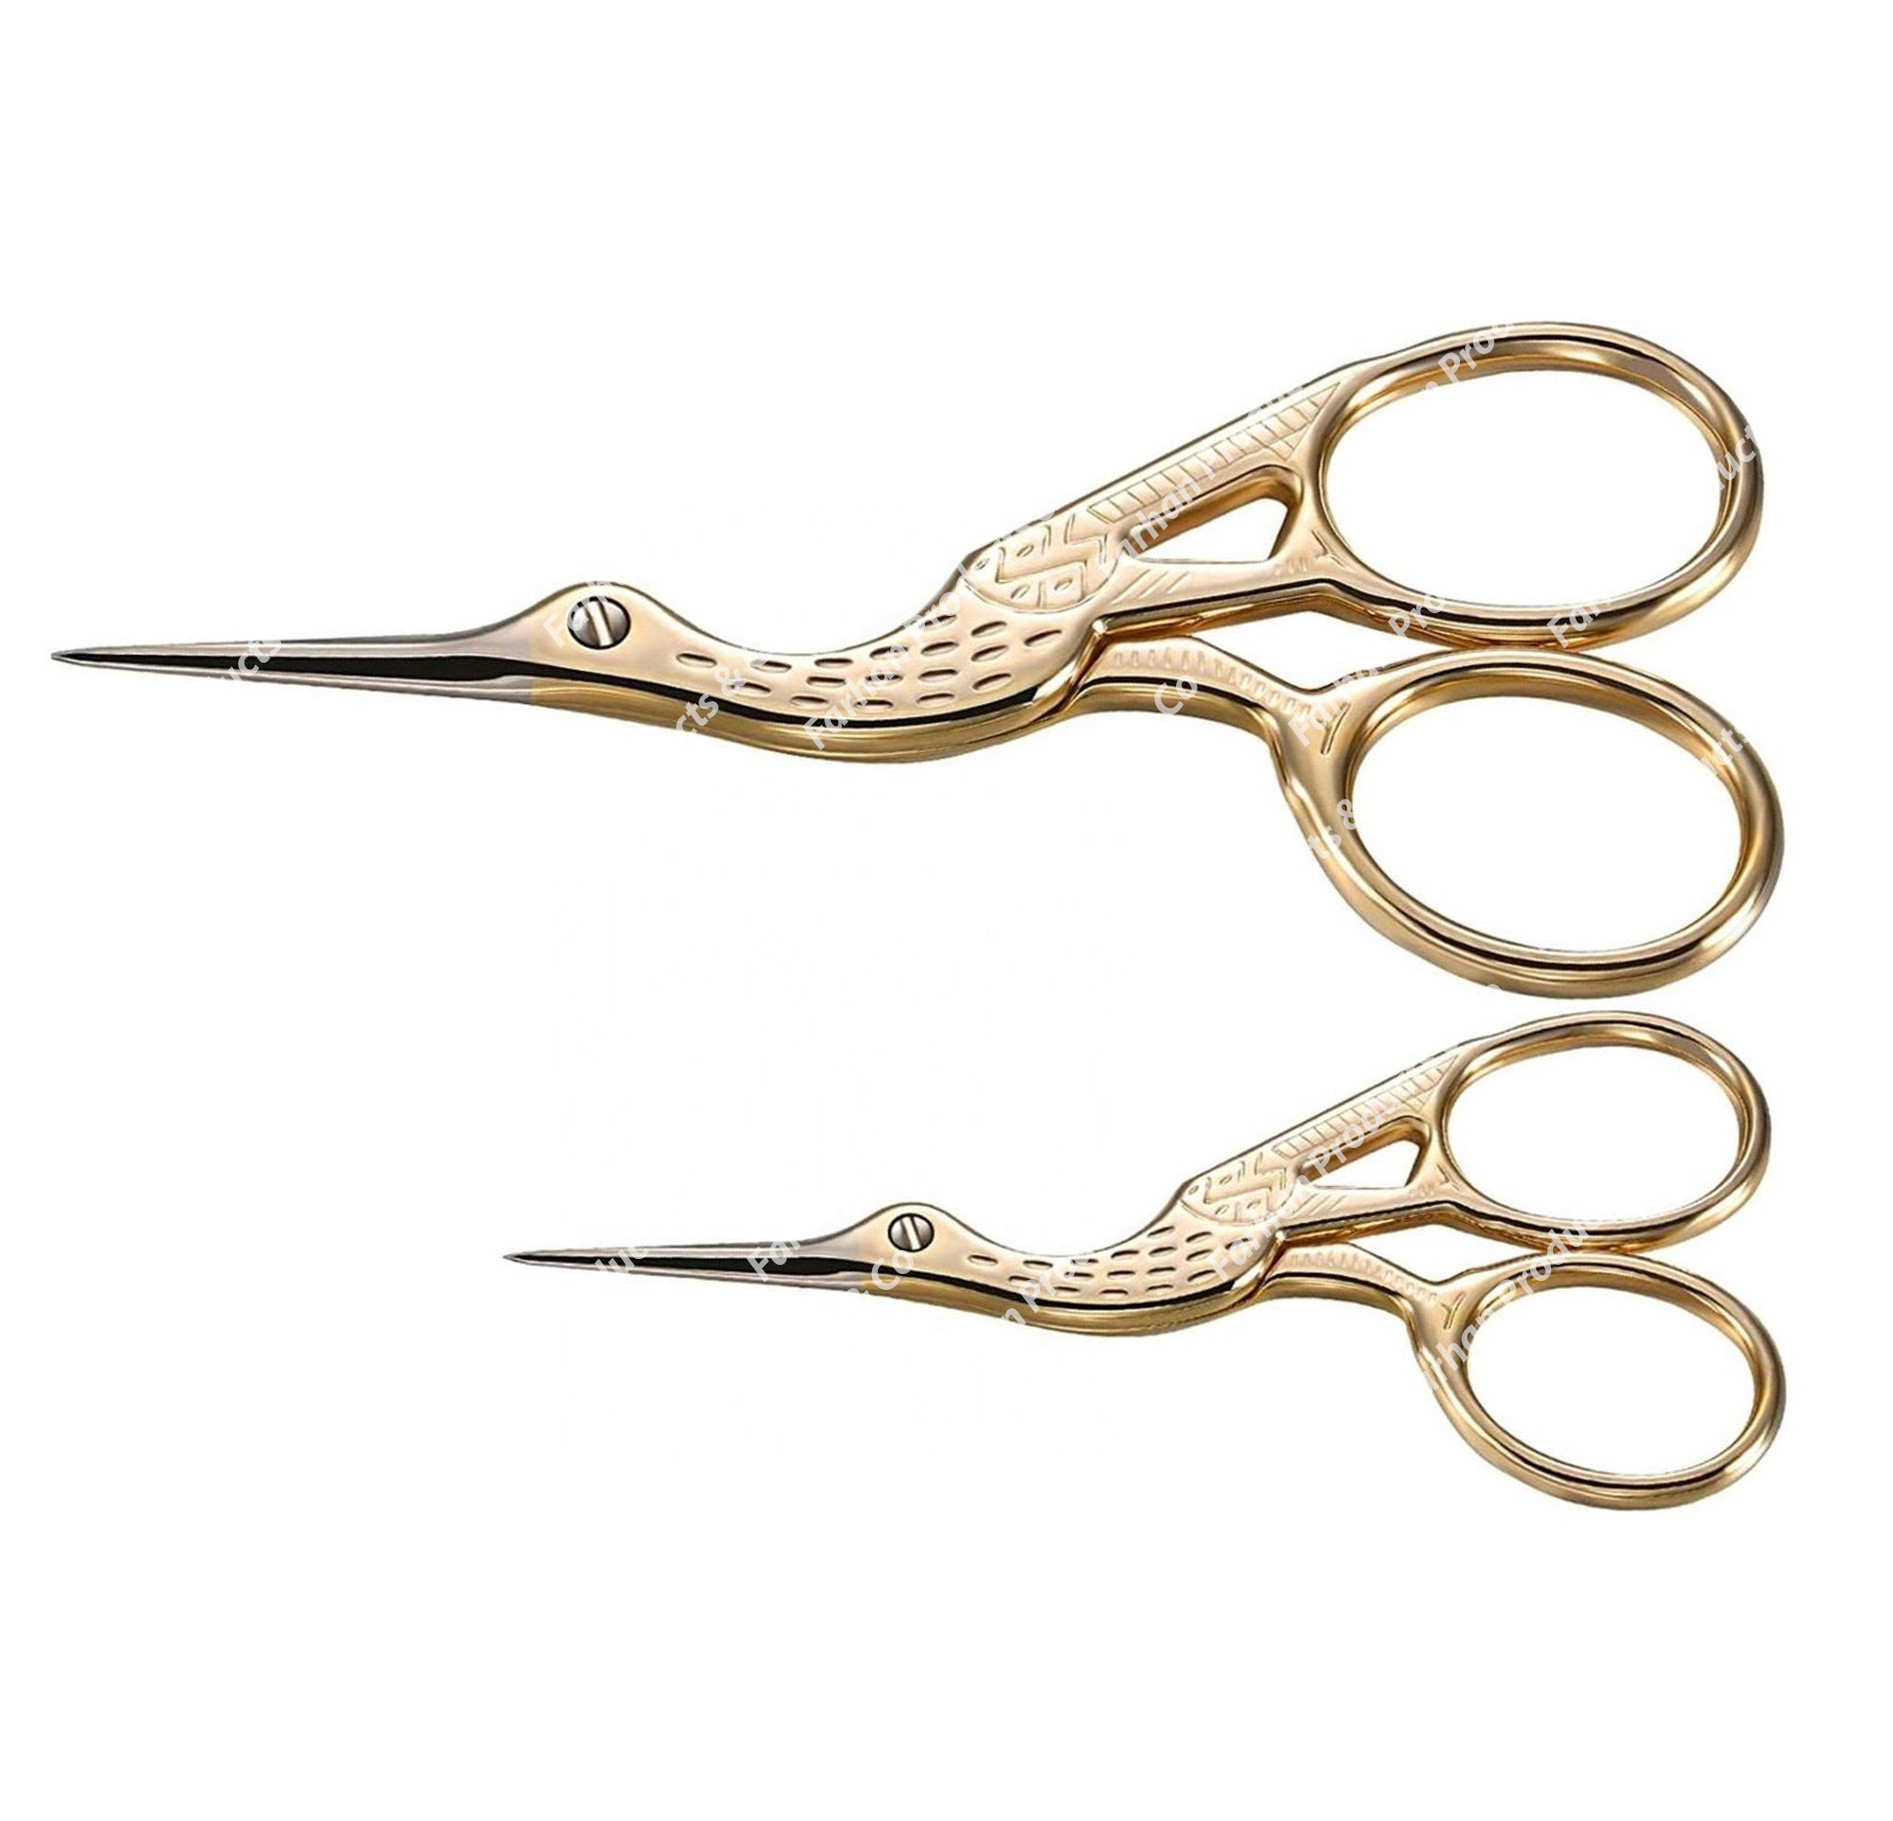 Stork Scissors Hot Selling Fancy Color Embroidery Stainless Steel Household Scissors Gold Plated